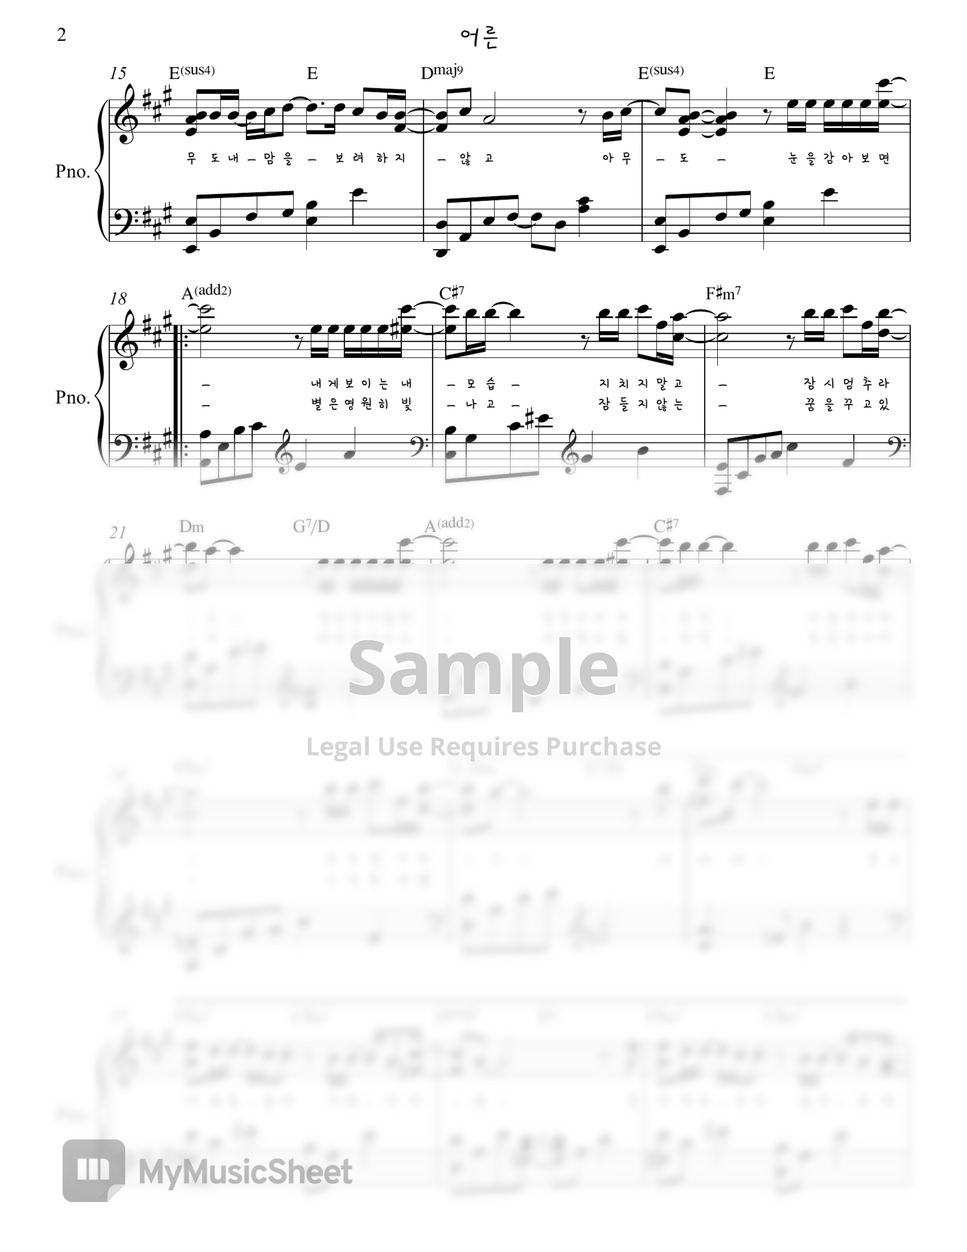 Sondia - Adult (My Mister OST) Piano Sheet by Gloria L.